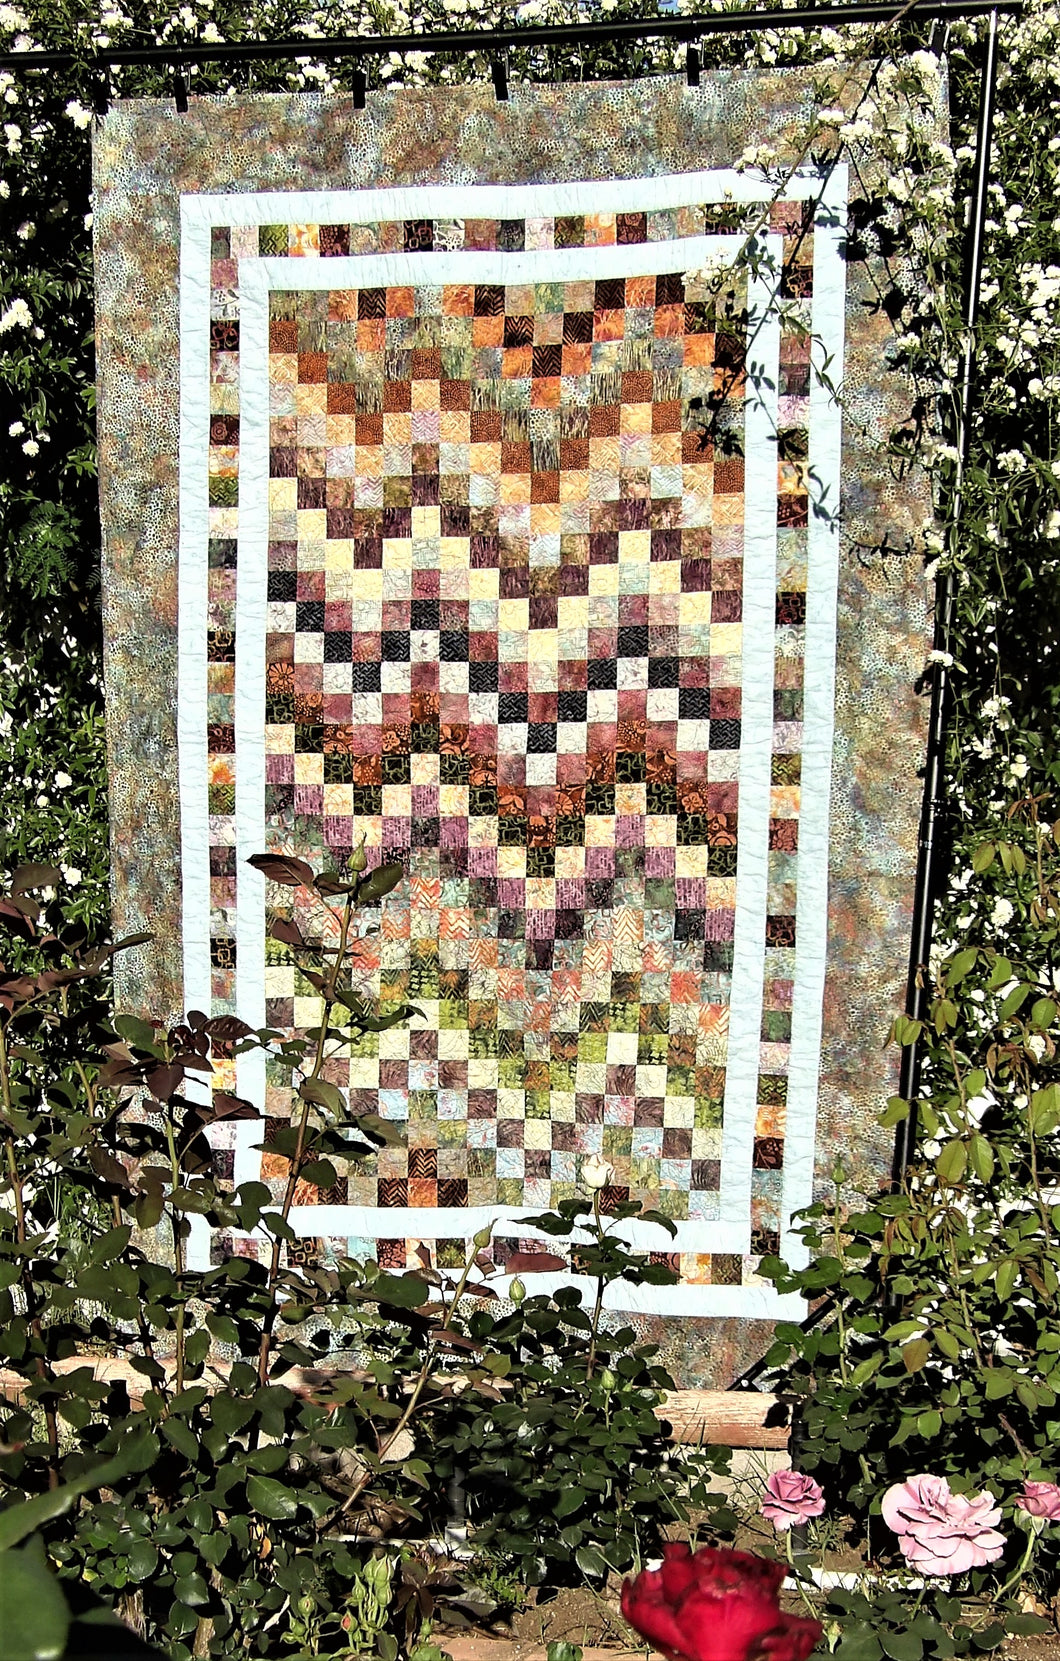 Bargello In A Day Quilt Pattern